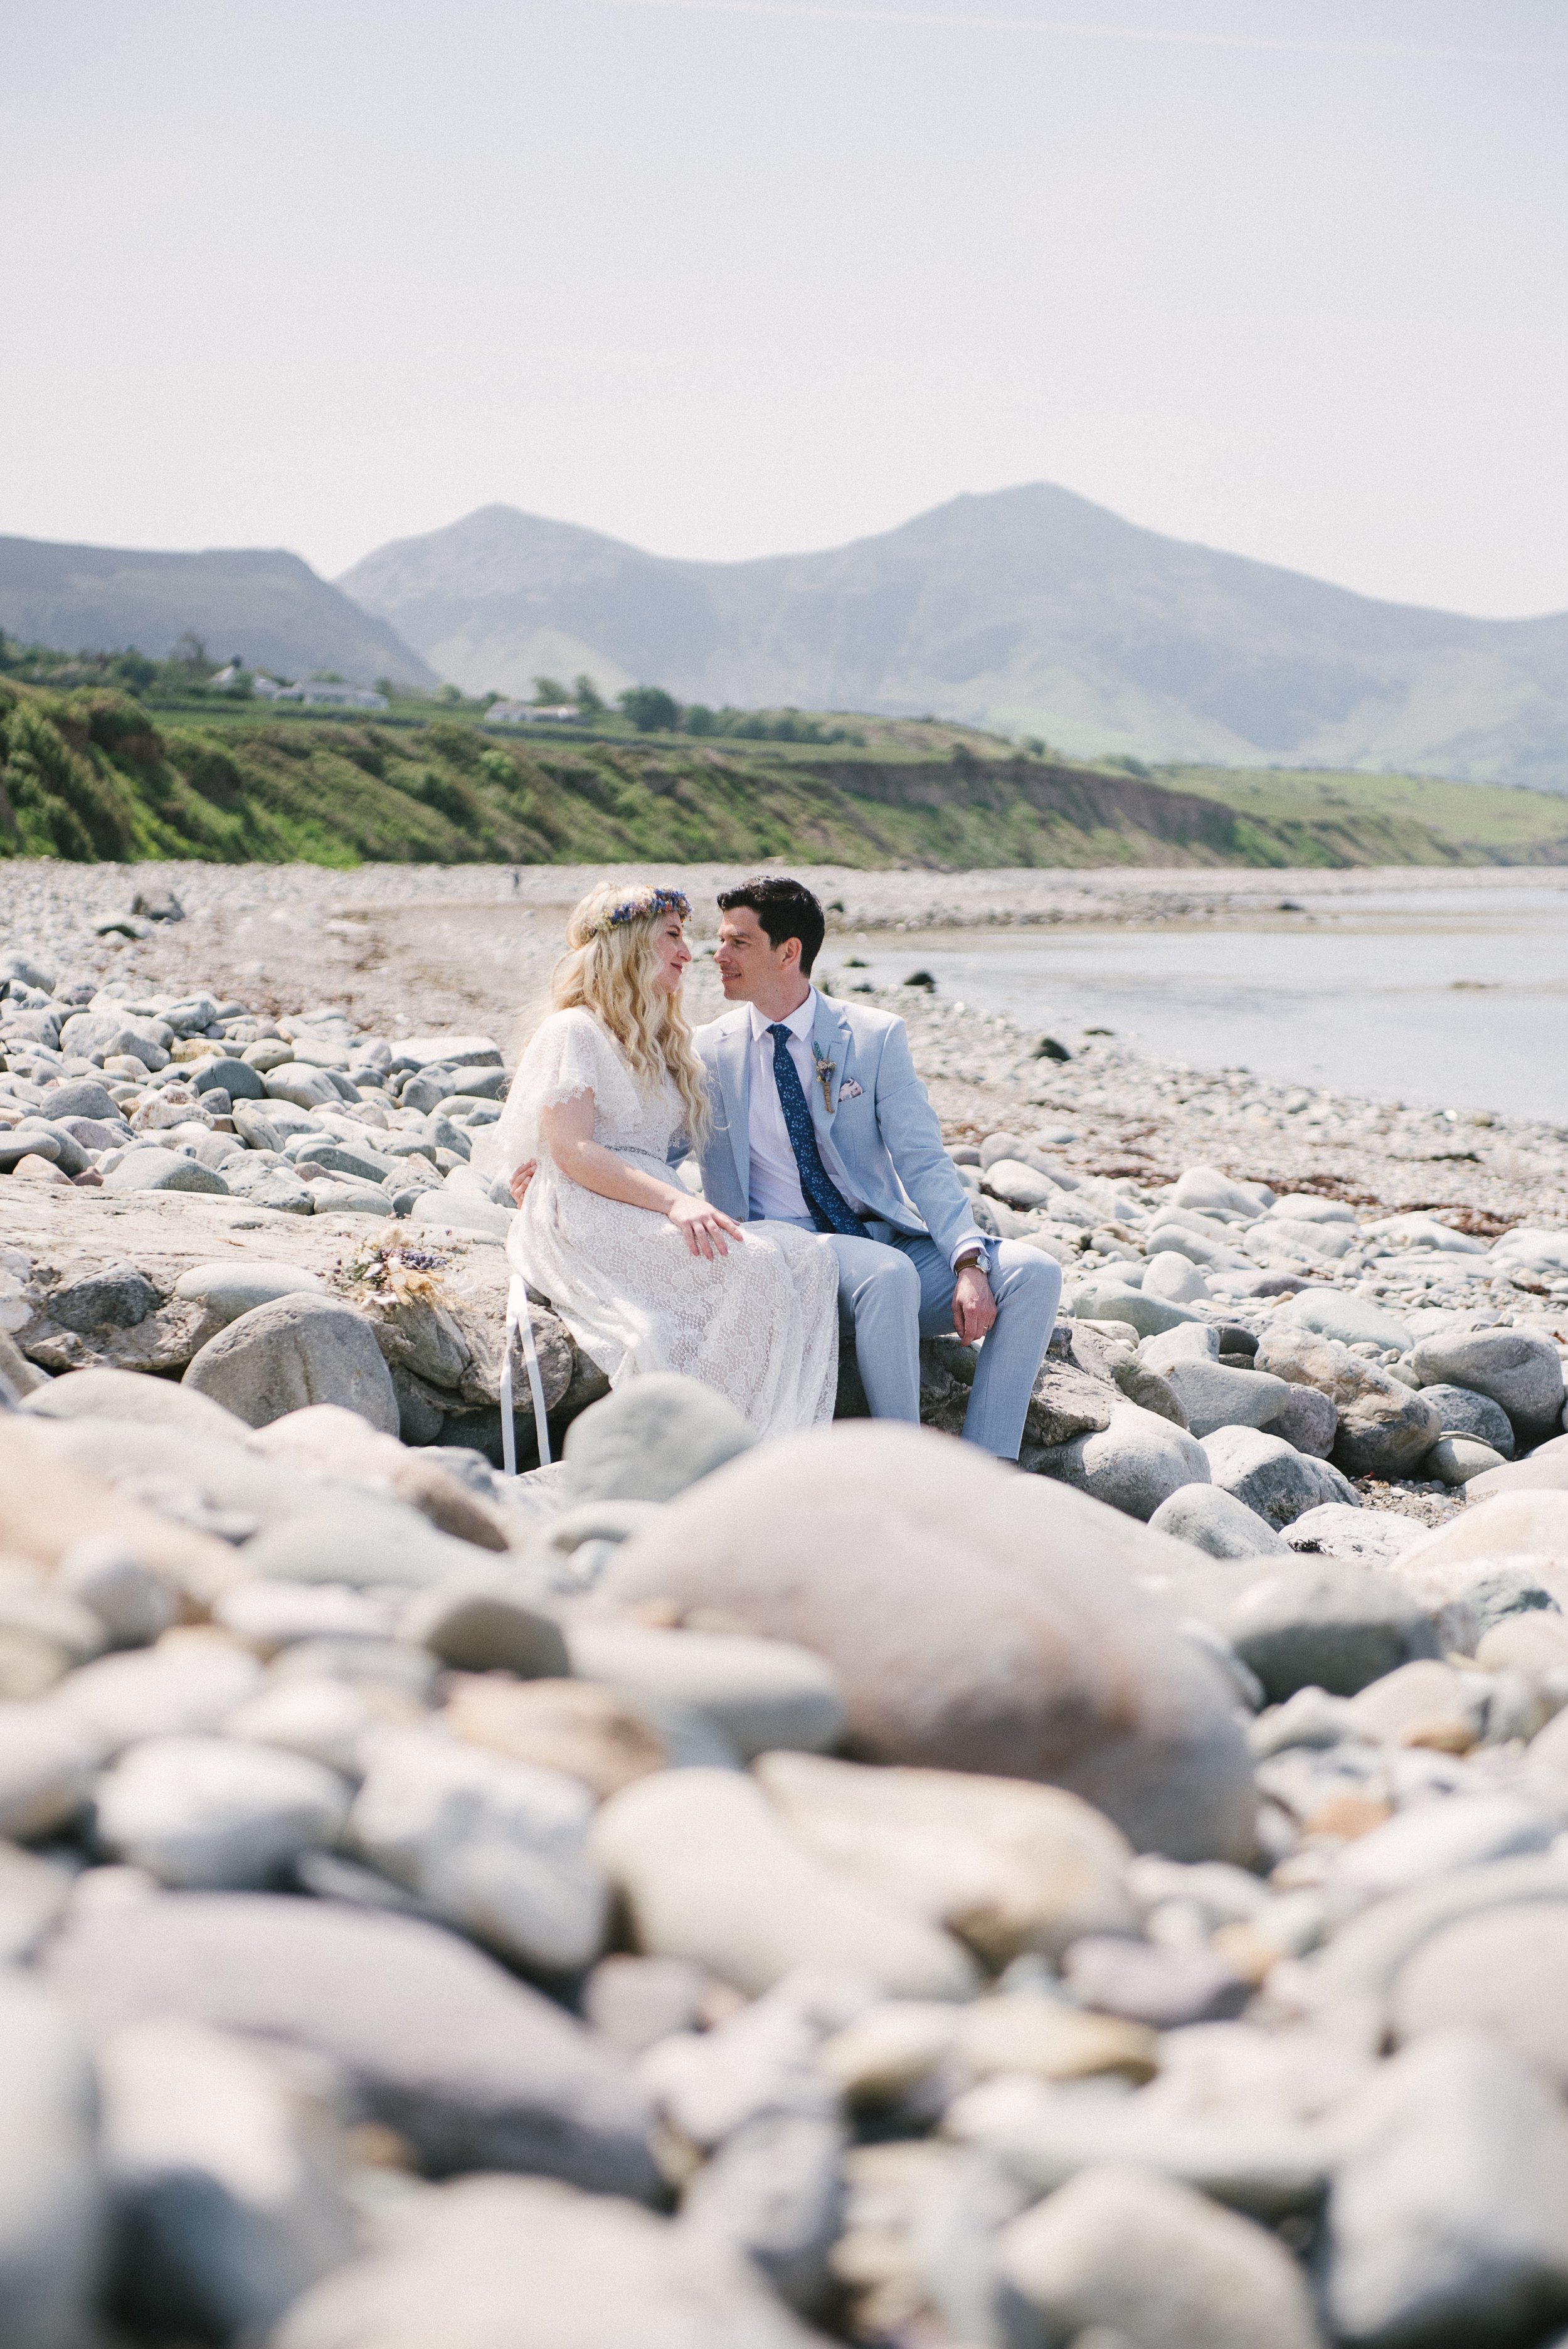 Clare and Paddy-8179.jpg